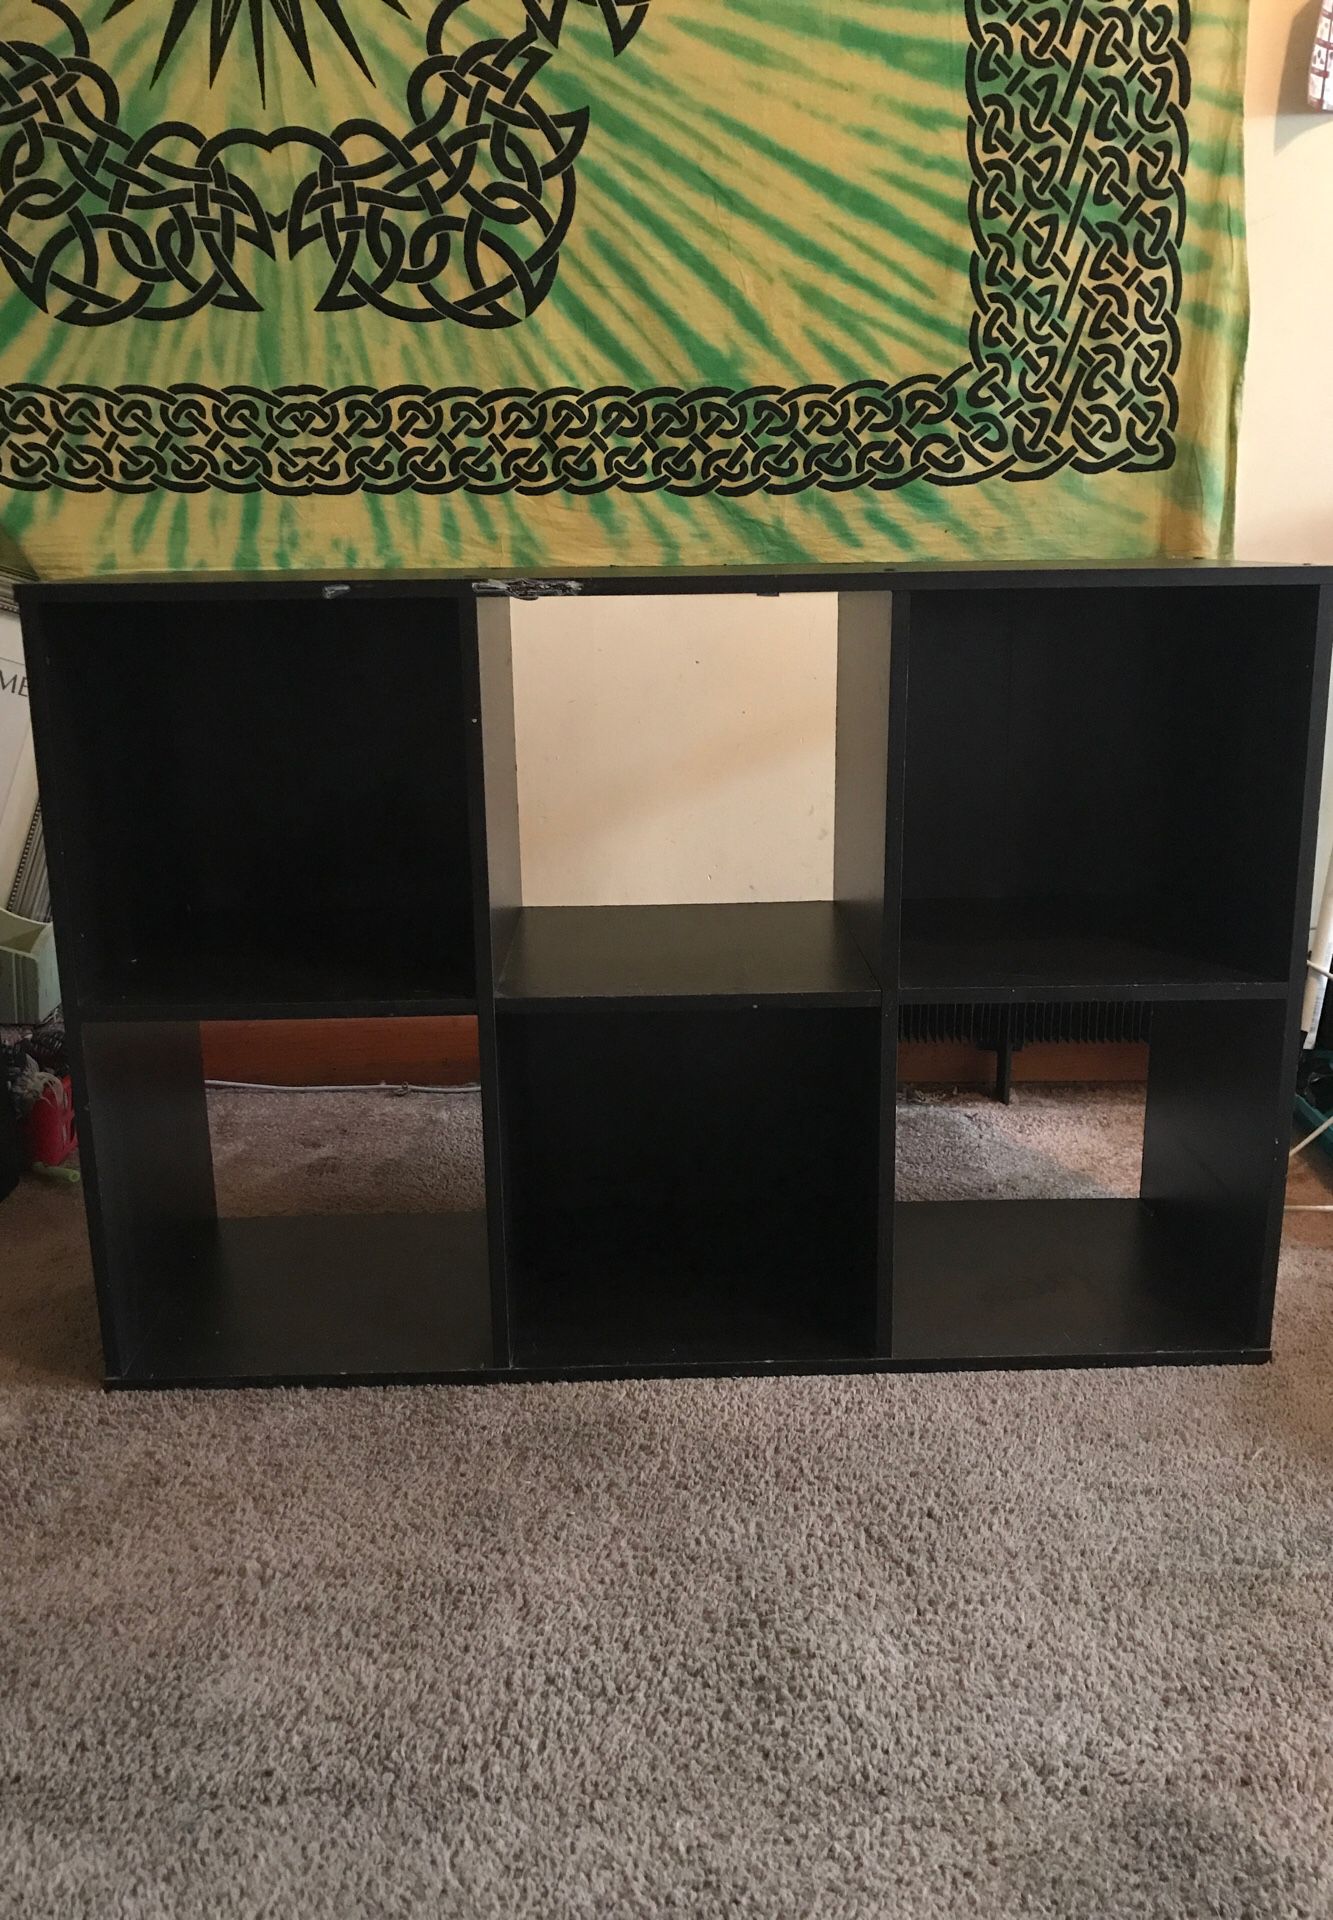 TV stand or storage unit